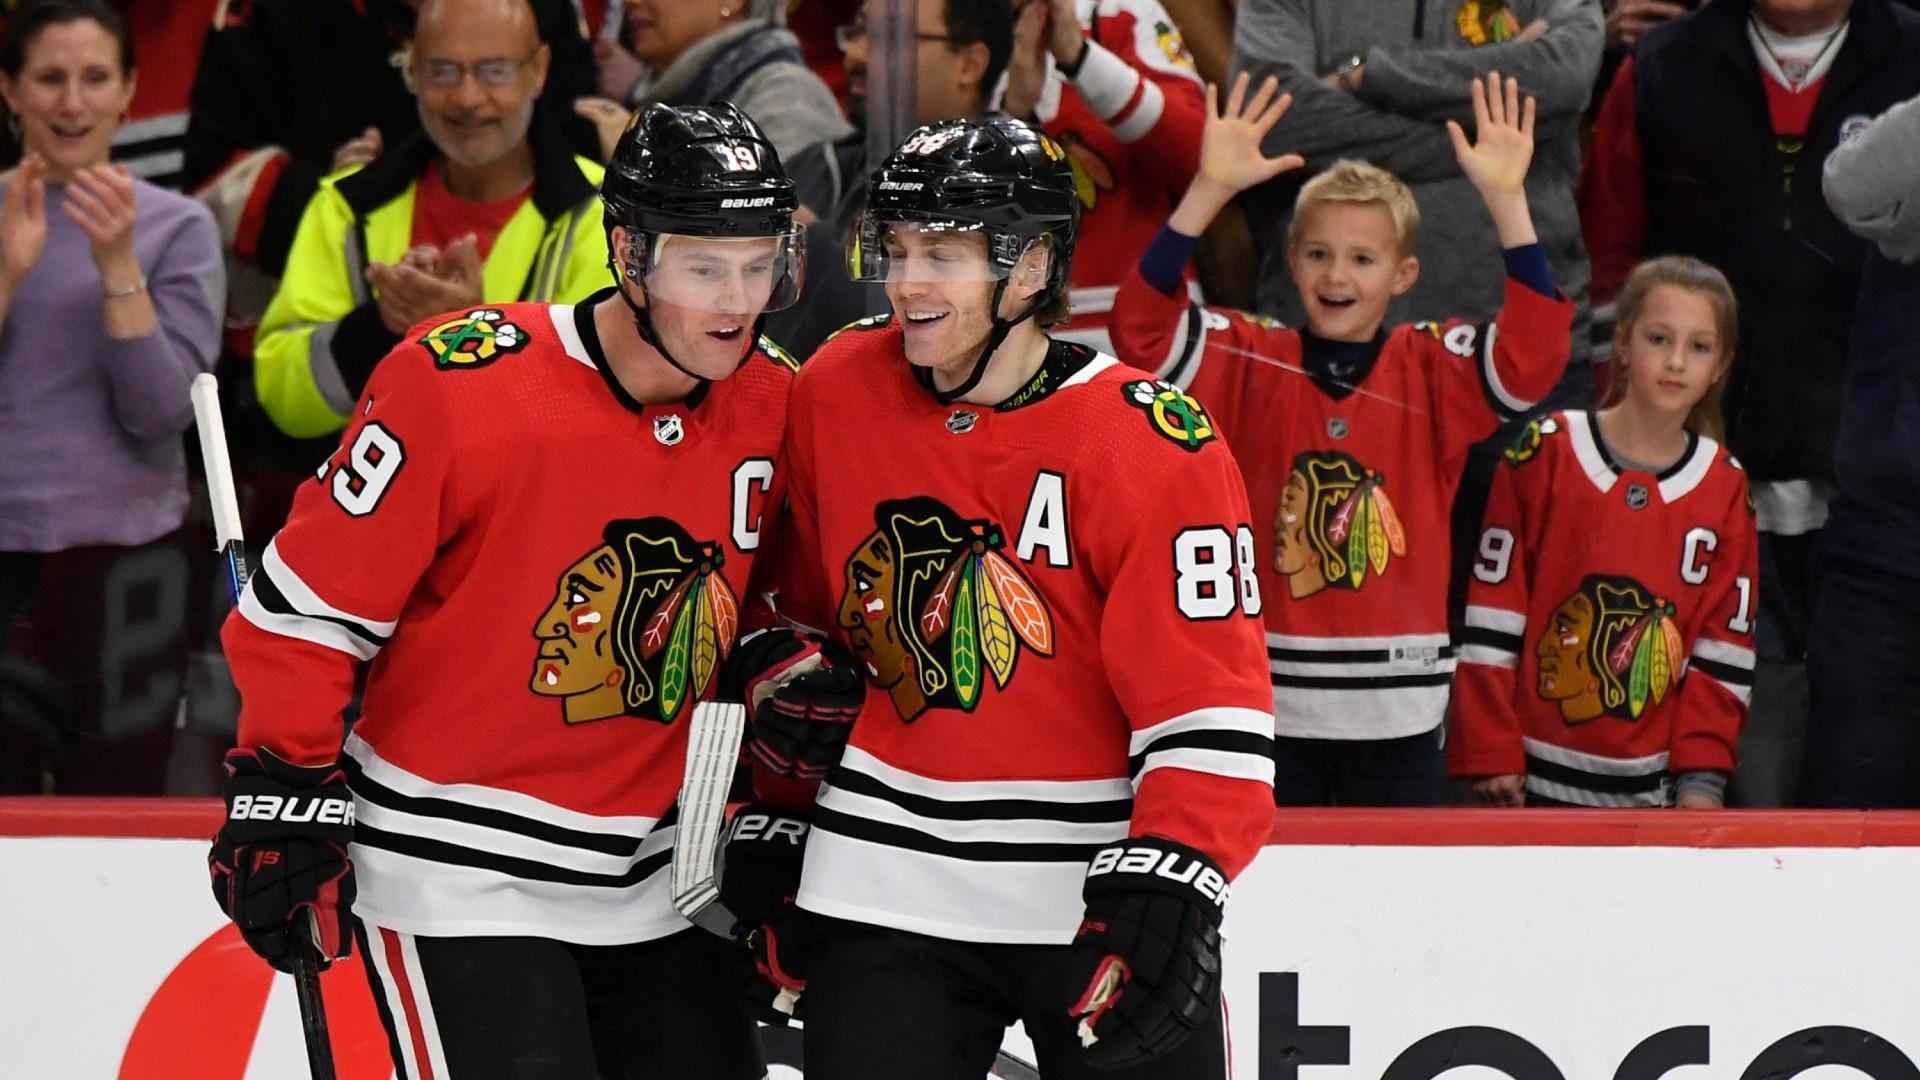 Chicago Blackhawks’ Patrick Kane (88) celebrates with teammate Jonathan Toews (19) after scoring a hat trick during the third period of an NHL hockey game against the Minnesota Wild in Chicago, in this Sunday, Dec. 15, 2019, file photo. (AP Photo / Paul Beaty, File)